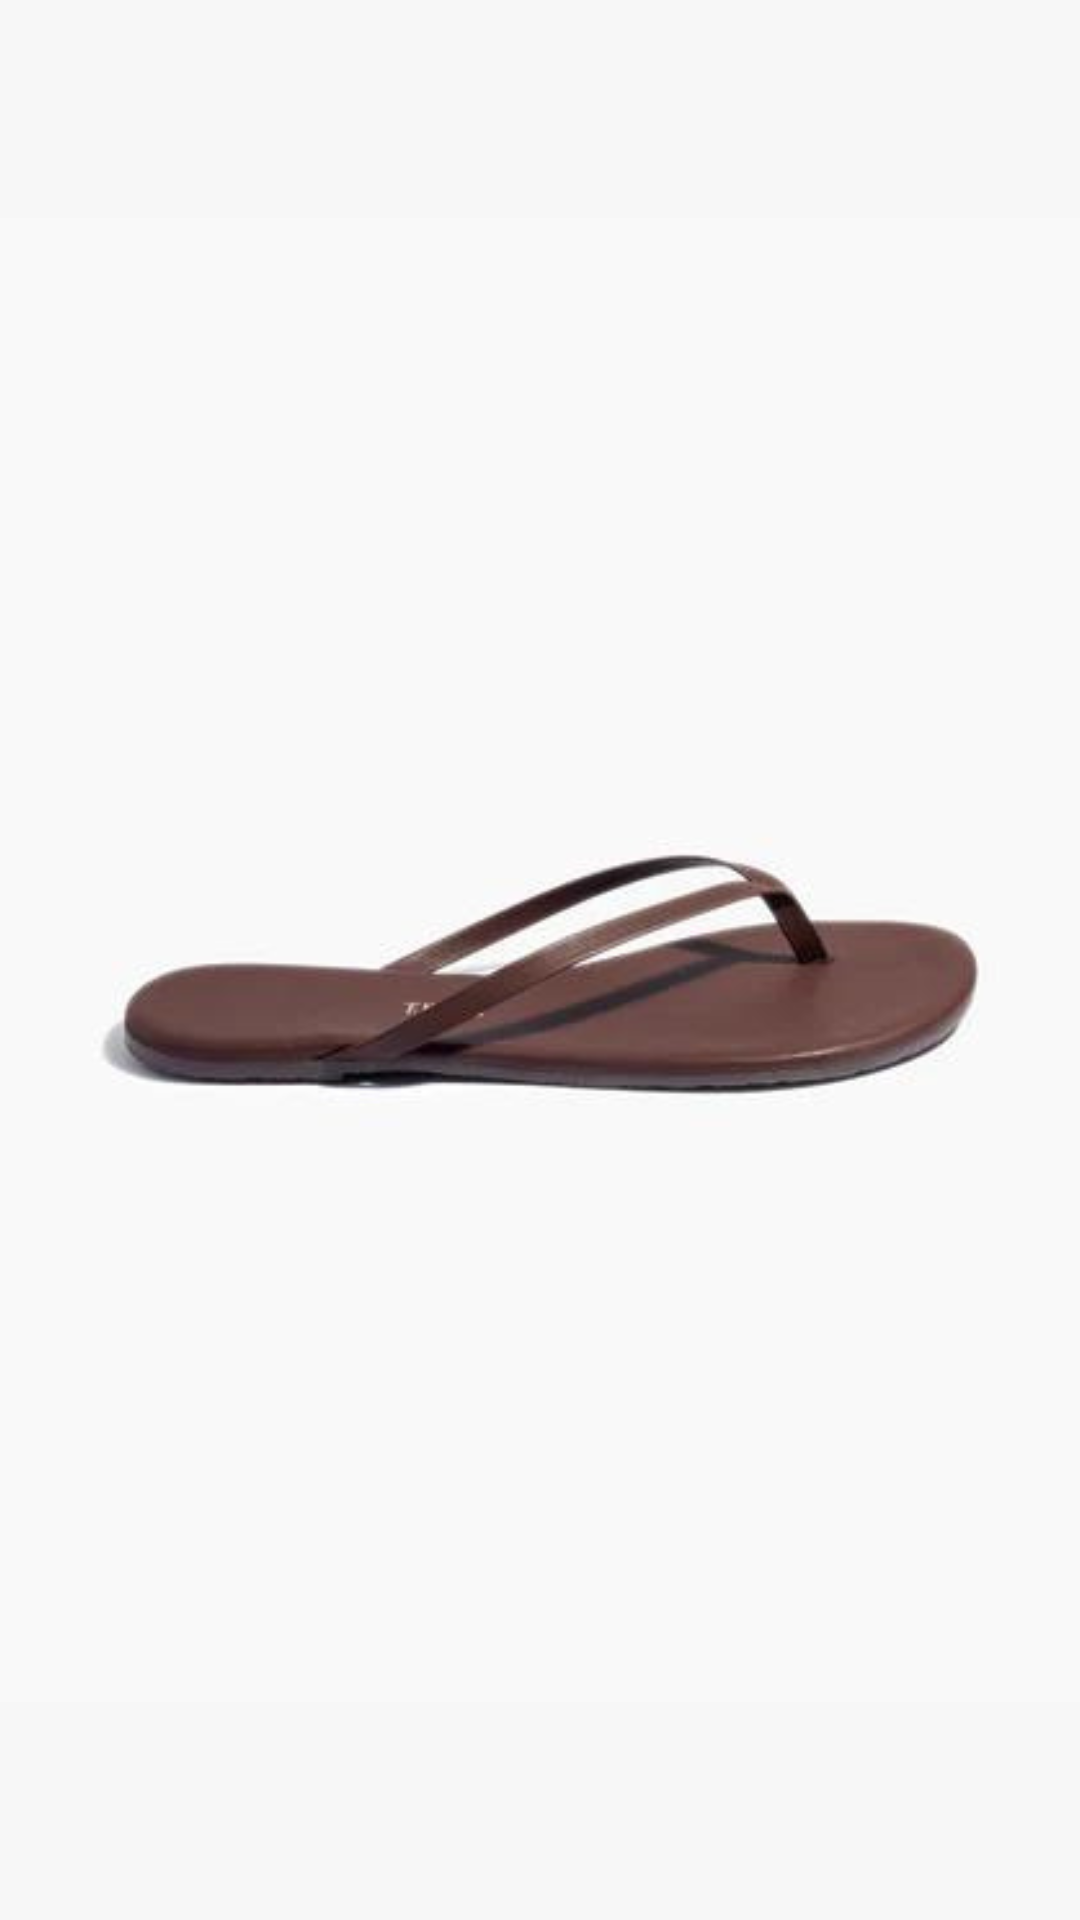 Tkees Lily Liner Sandal in Cappuccino